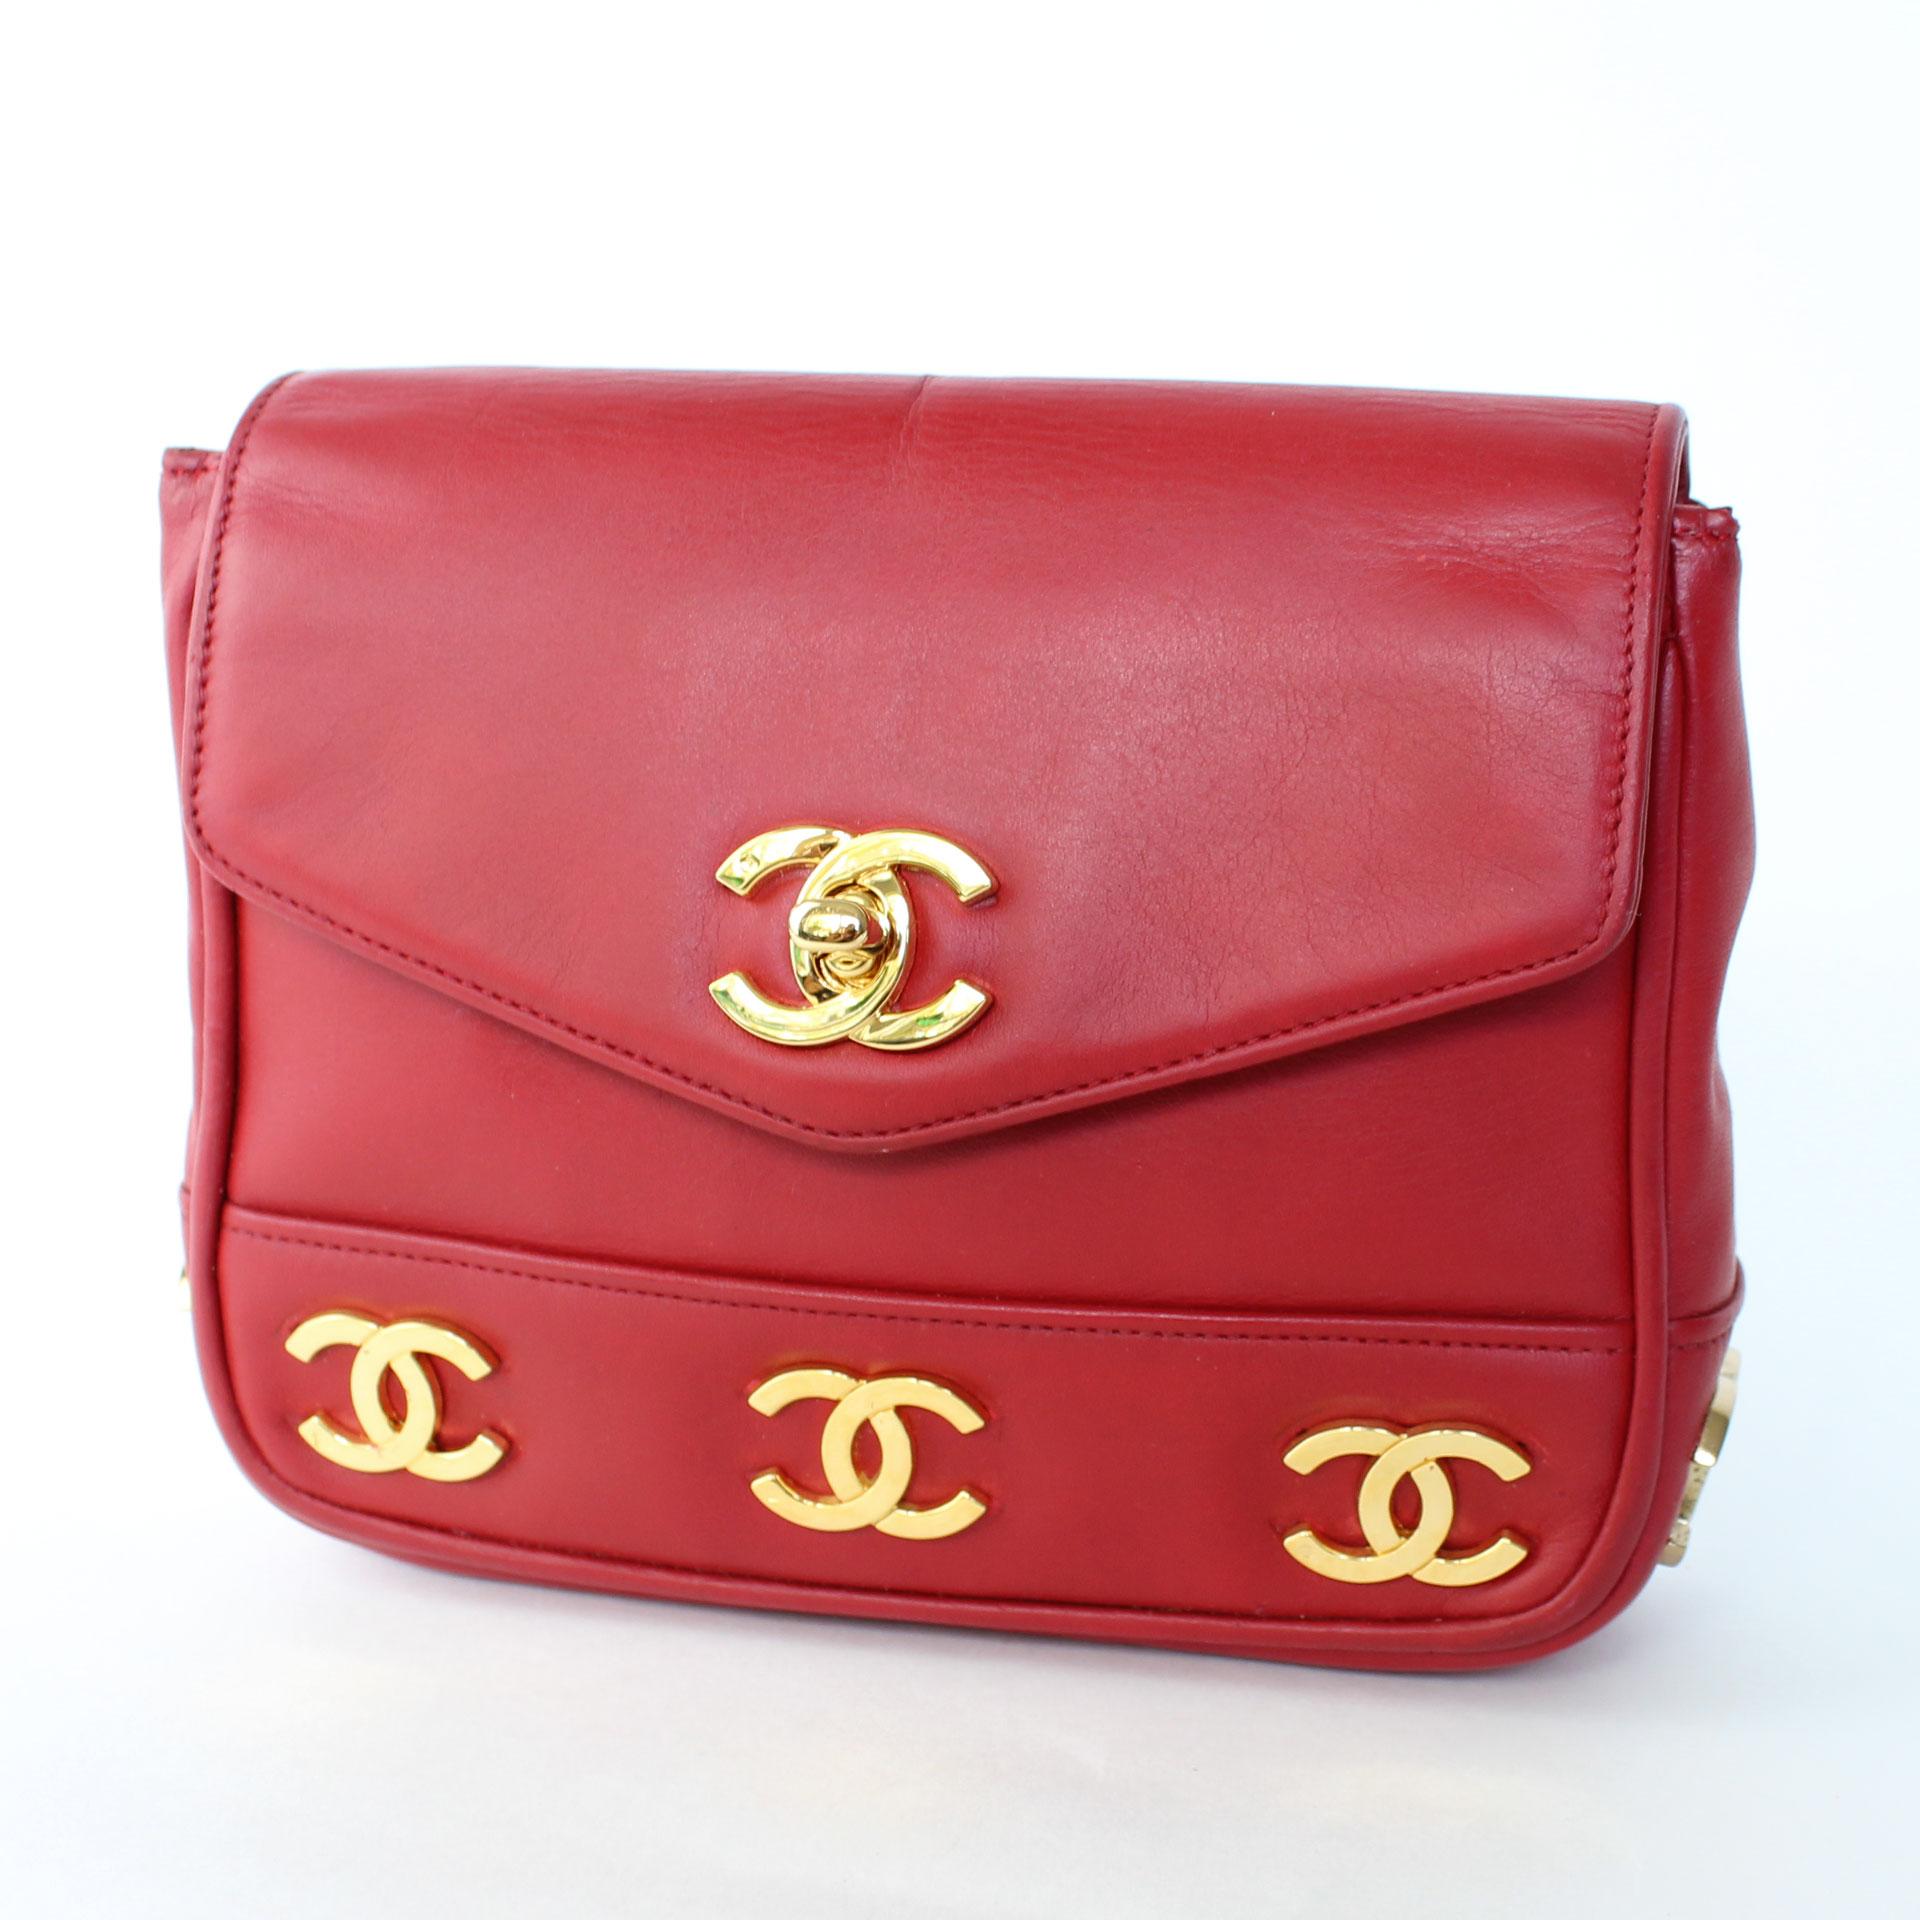 Chanel Vintage 1991 Rare Red Triple Cc Logos Waist Belt Fanny Pack Bum Bag  In Good Condition For Sale In Miami, FL